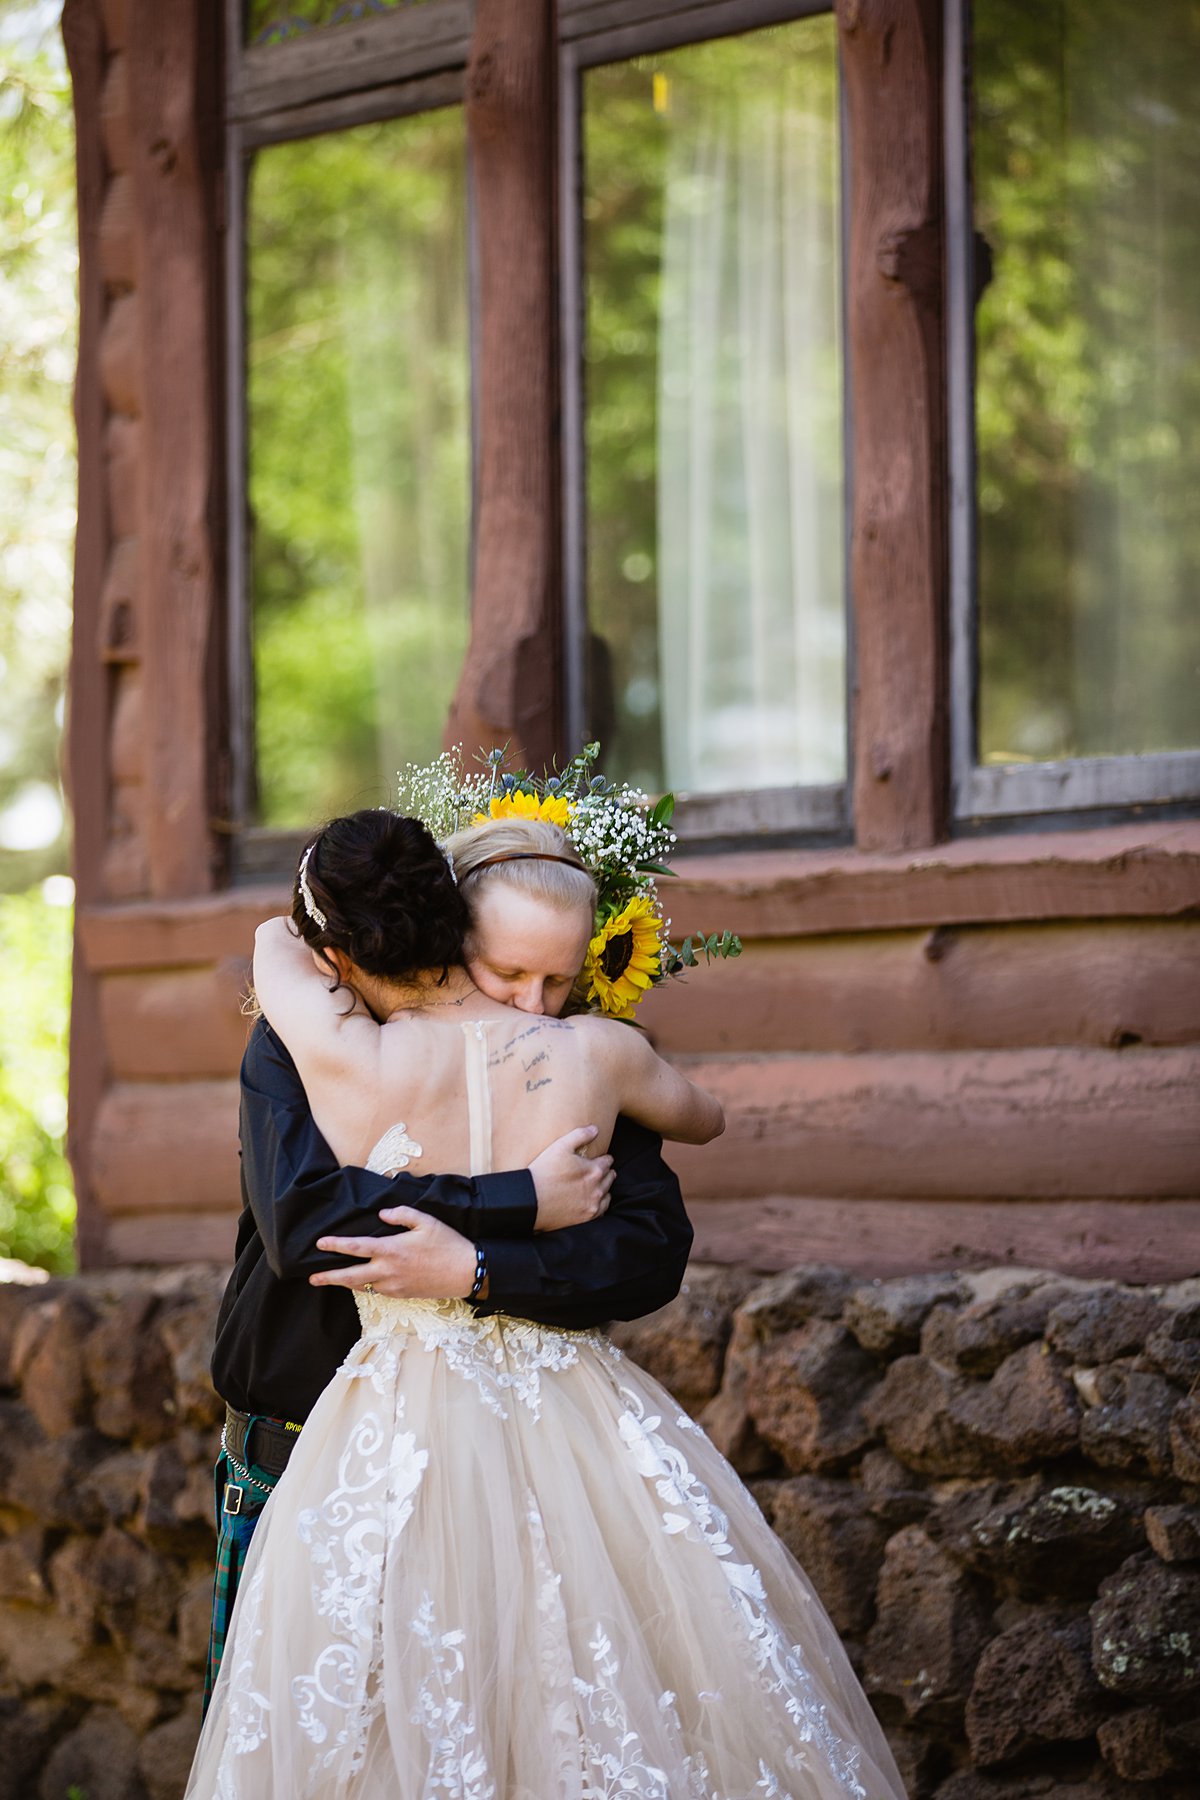 Bride and groom share an intimate moment during their first look at the Riordan Mansion at by Flagstaff wedding photographers PMA Photography.